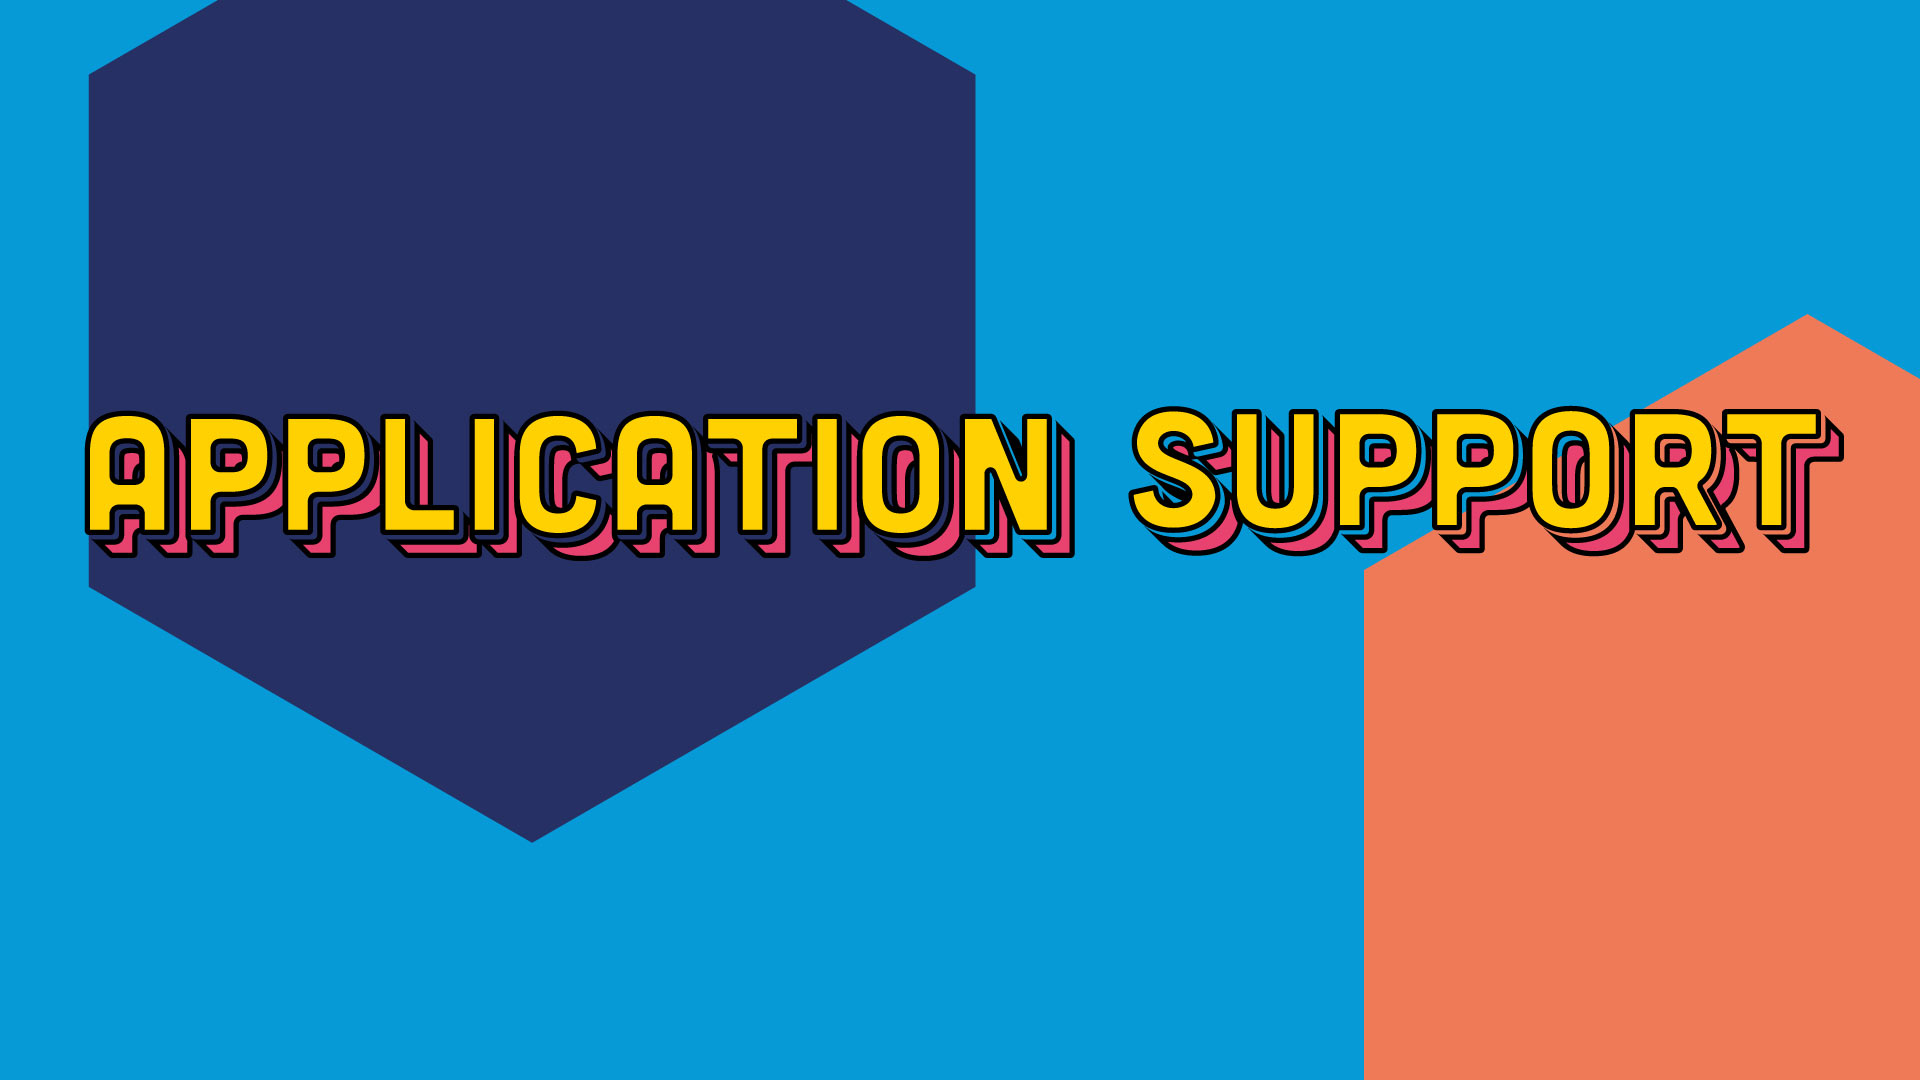 Application support tools